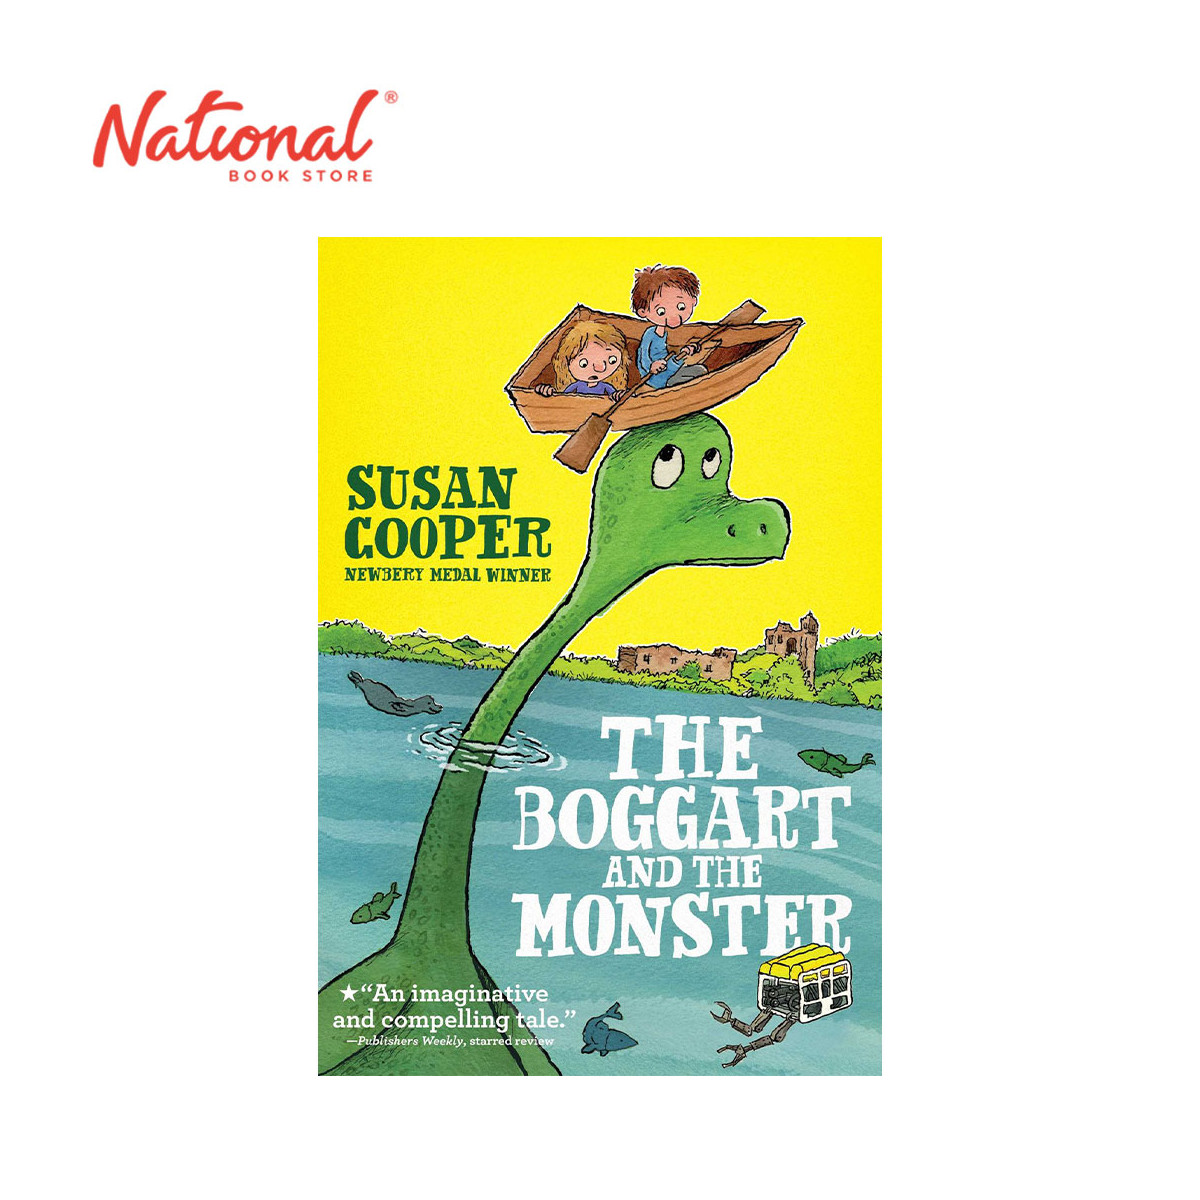 The Boggart And The Monster By Susan Cooper - Trade Paperback - Children's Books